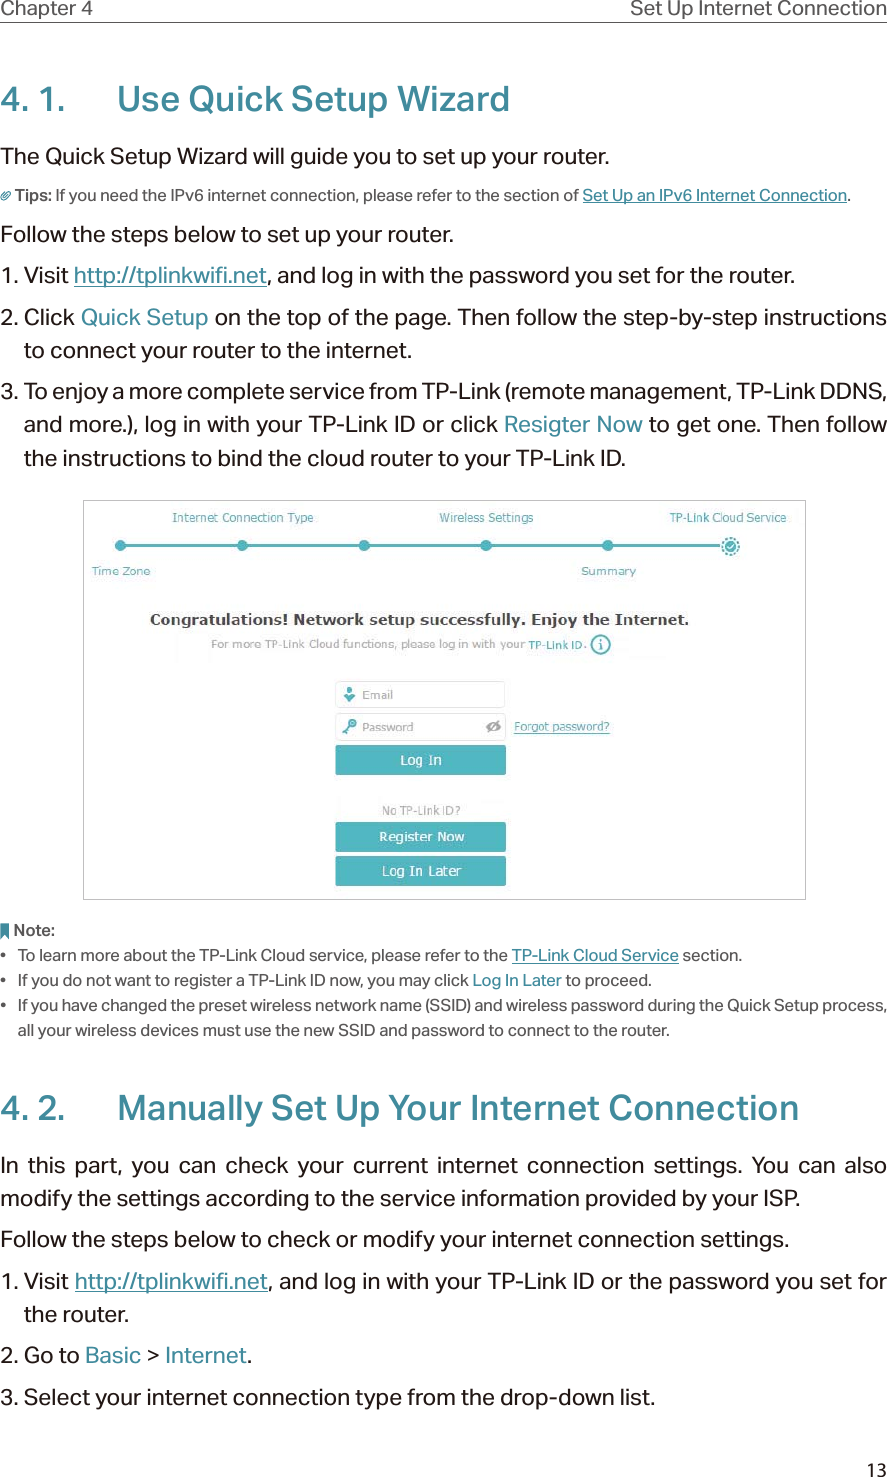 13Chapter 4 Set Up Internet Connection4. 1.  Use Quick Setup WizardThe Quick Setup Wizard will guide you to set up your router.Tips: If you need the IPv6 internet connection, please refer to the section of Set Up an IPv6 Internet Connection.Follow the steps below to set up your router.1. Visit http://tplinkwifi.net, and log in with the password you set for the router.2. Click Quick Setup on the top of the page. Then follow the step-by-step instructions to connect your router to the internet.3. To enjoy a more complete service from TP-Link (remote management, TP-Link DDNS, and more.), log in with your TP-Link ID or click Resigter Now to get one. Then follow the instructions to bind the cloud router to your TP-Link ID.Note:•  To learn more about the TP-Link Cloud service, please refer to the TP-Link Cloud Service section.•  If you do not want to register a TP-Link ID now, you may click Log In Later to proceed.•  If you have changed the preset wireless network name (SSID) and wireless password during the Quick Setup process, all your wireless devices must use the new SSID and password to connect to the router.4. 2.  Manually Set Up Your Internet Connection In this part, you can check your current internet connection settings. You can also modify the settings according to the service information provided by your ISP.Follow the steps below to check or modify your internet connection settings.1. Visit http://tplinkwifi.net, and log in with your TP-Link ID or the password you set for the router.2. Go to Basic &gt; Internet.3. Select your internet connection type from the drop-down list. 